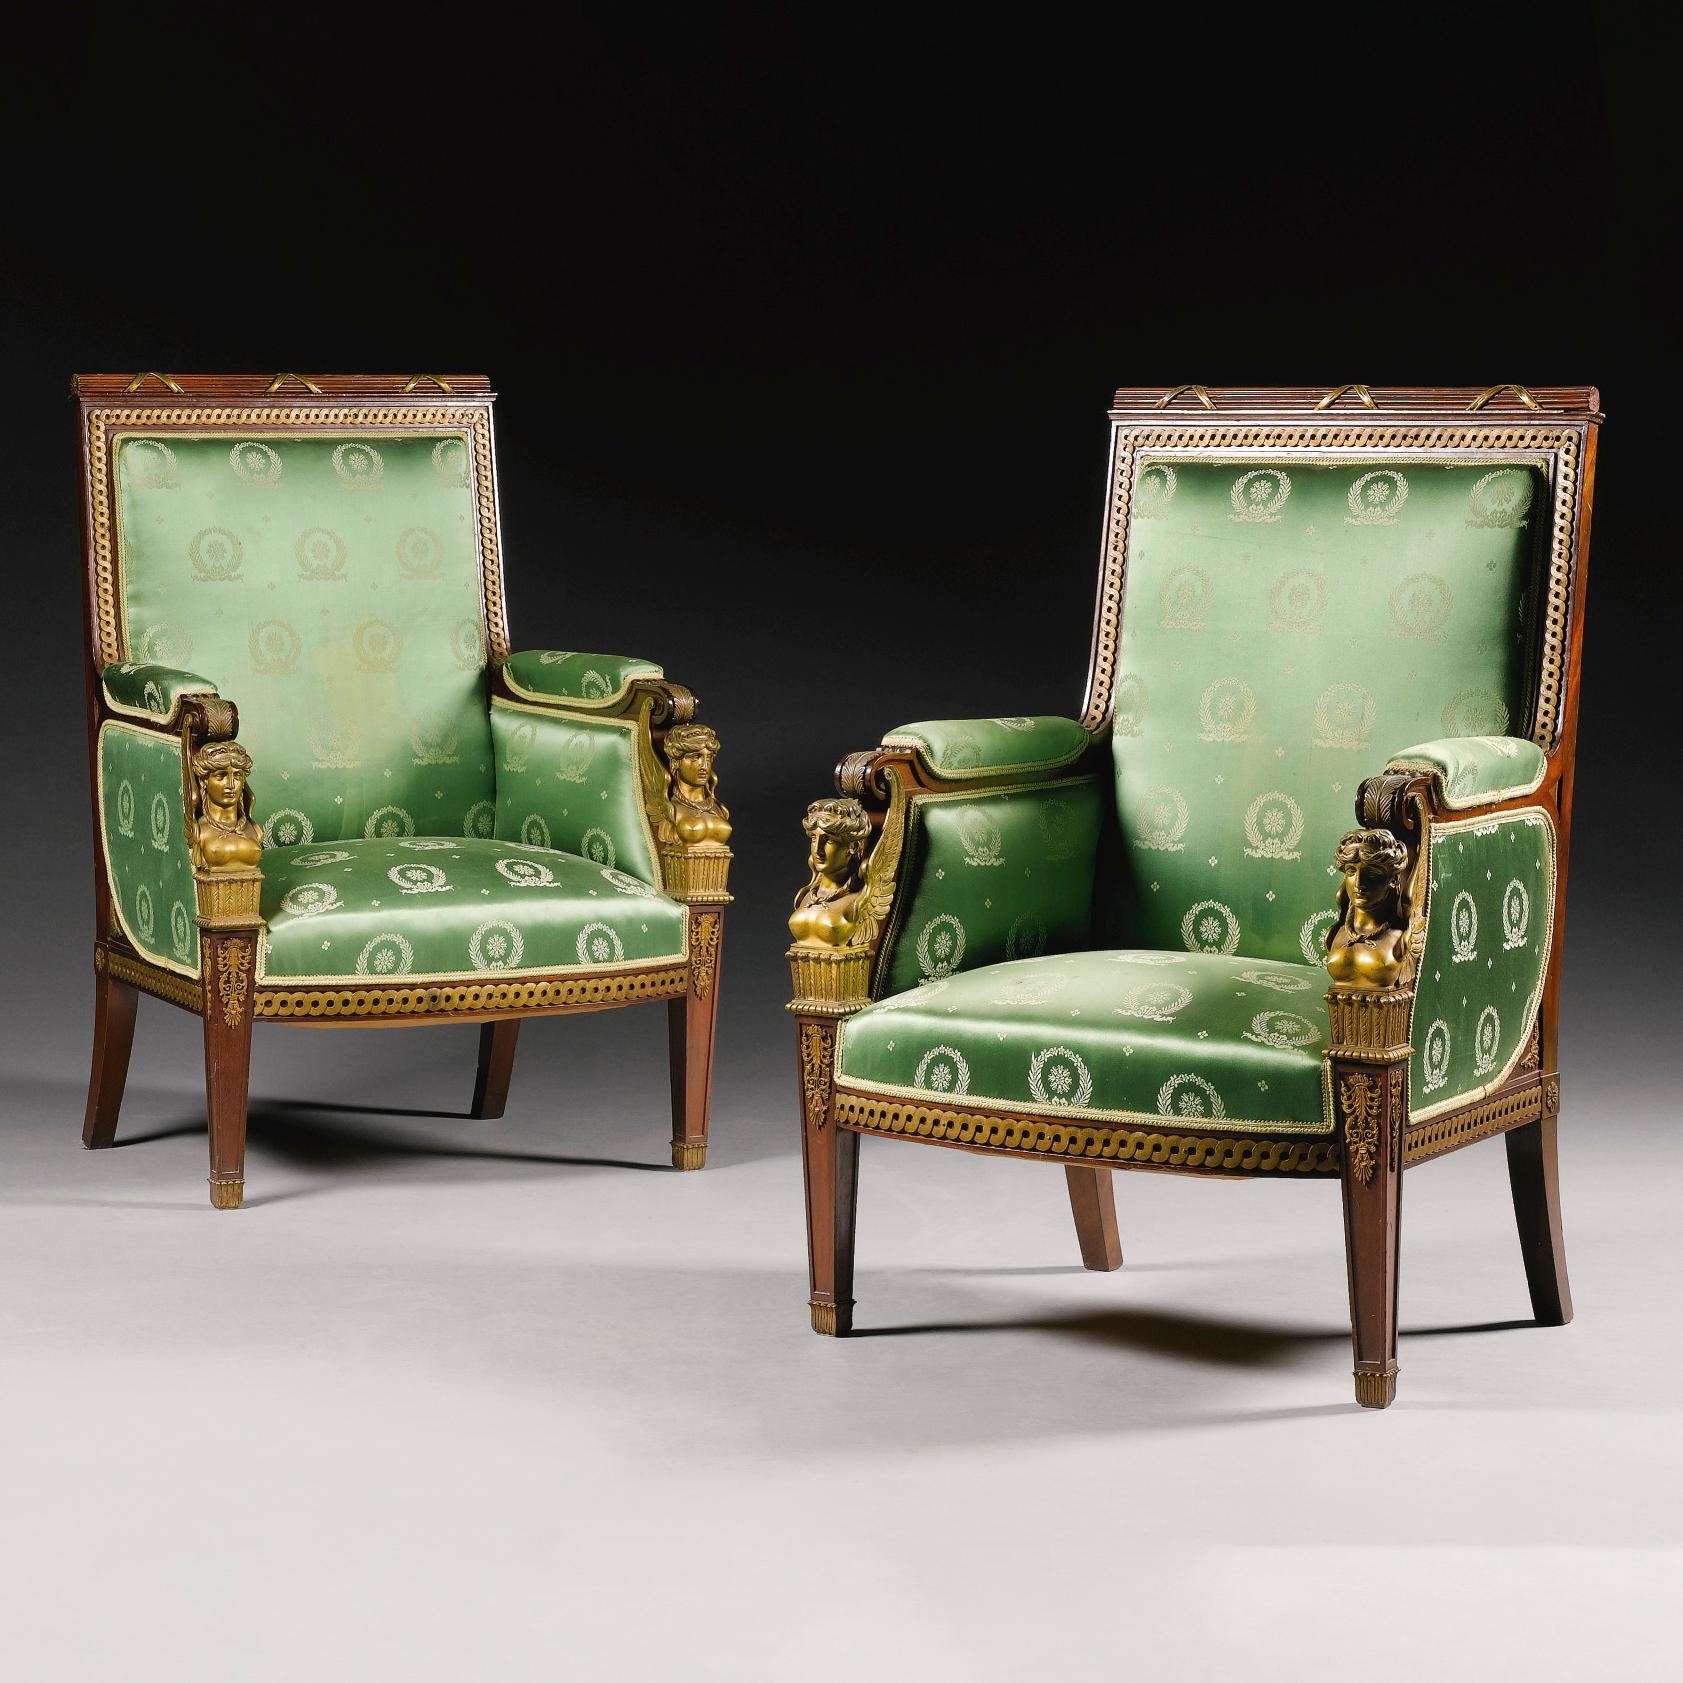 A  Pair of Empire Style Bergères in the Manner of Jacob-Desmalter In Good Condition For Sale In Brighton, West Sussex